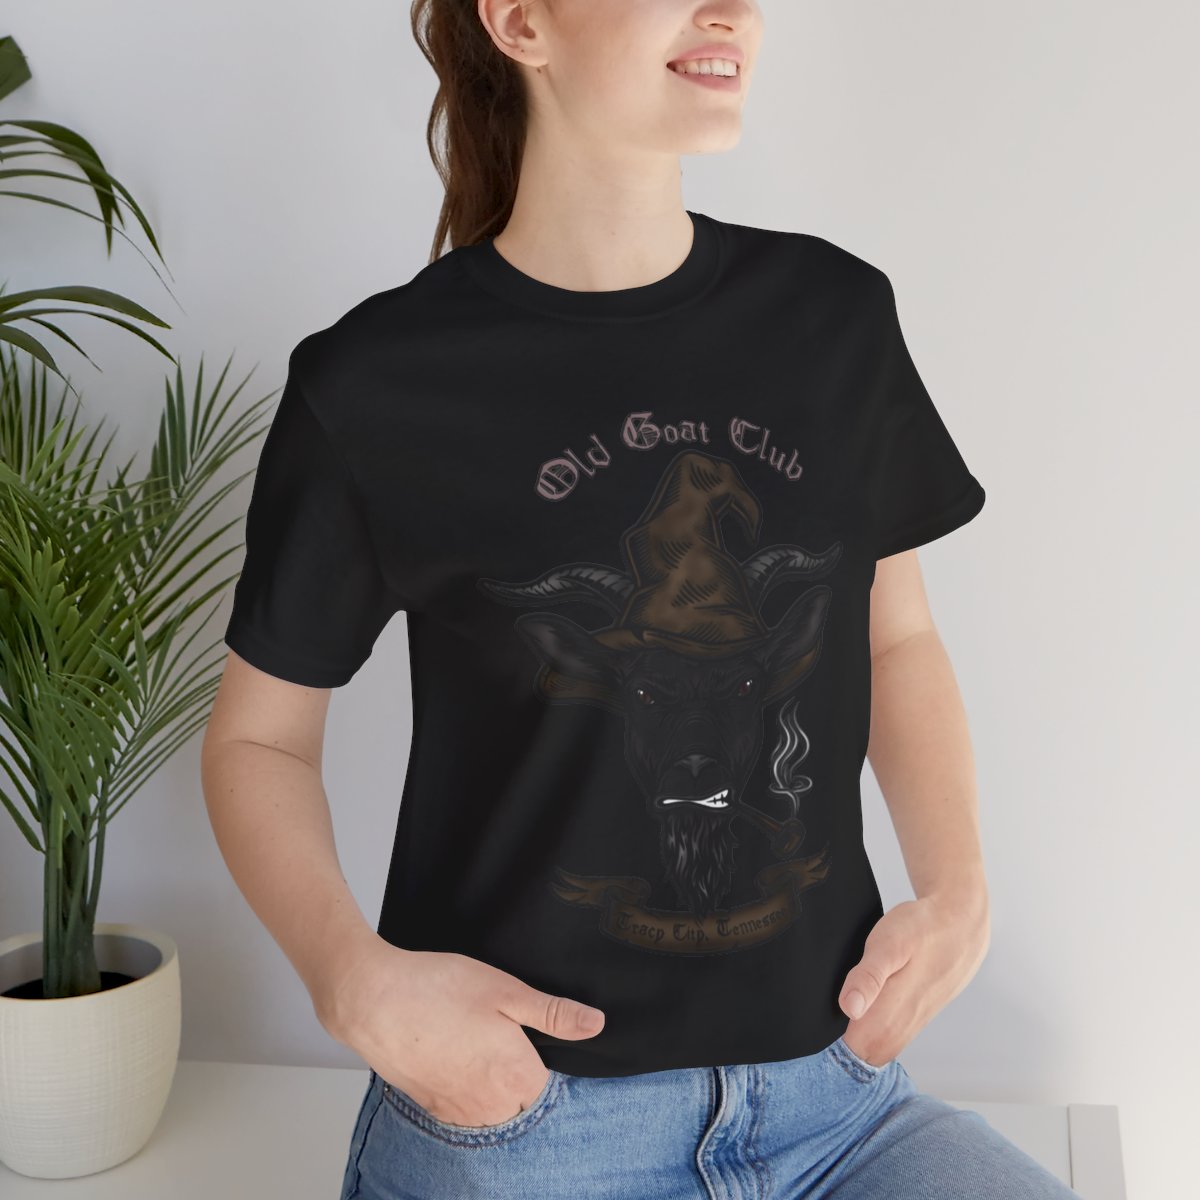 "Old Goat Club-Tracy City, Tennessee" Unisex Jersey Short Sleeve Tee product thumbnail image